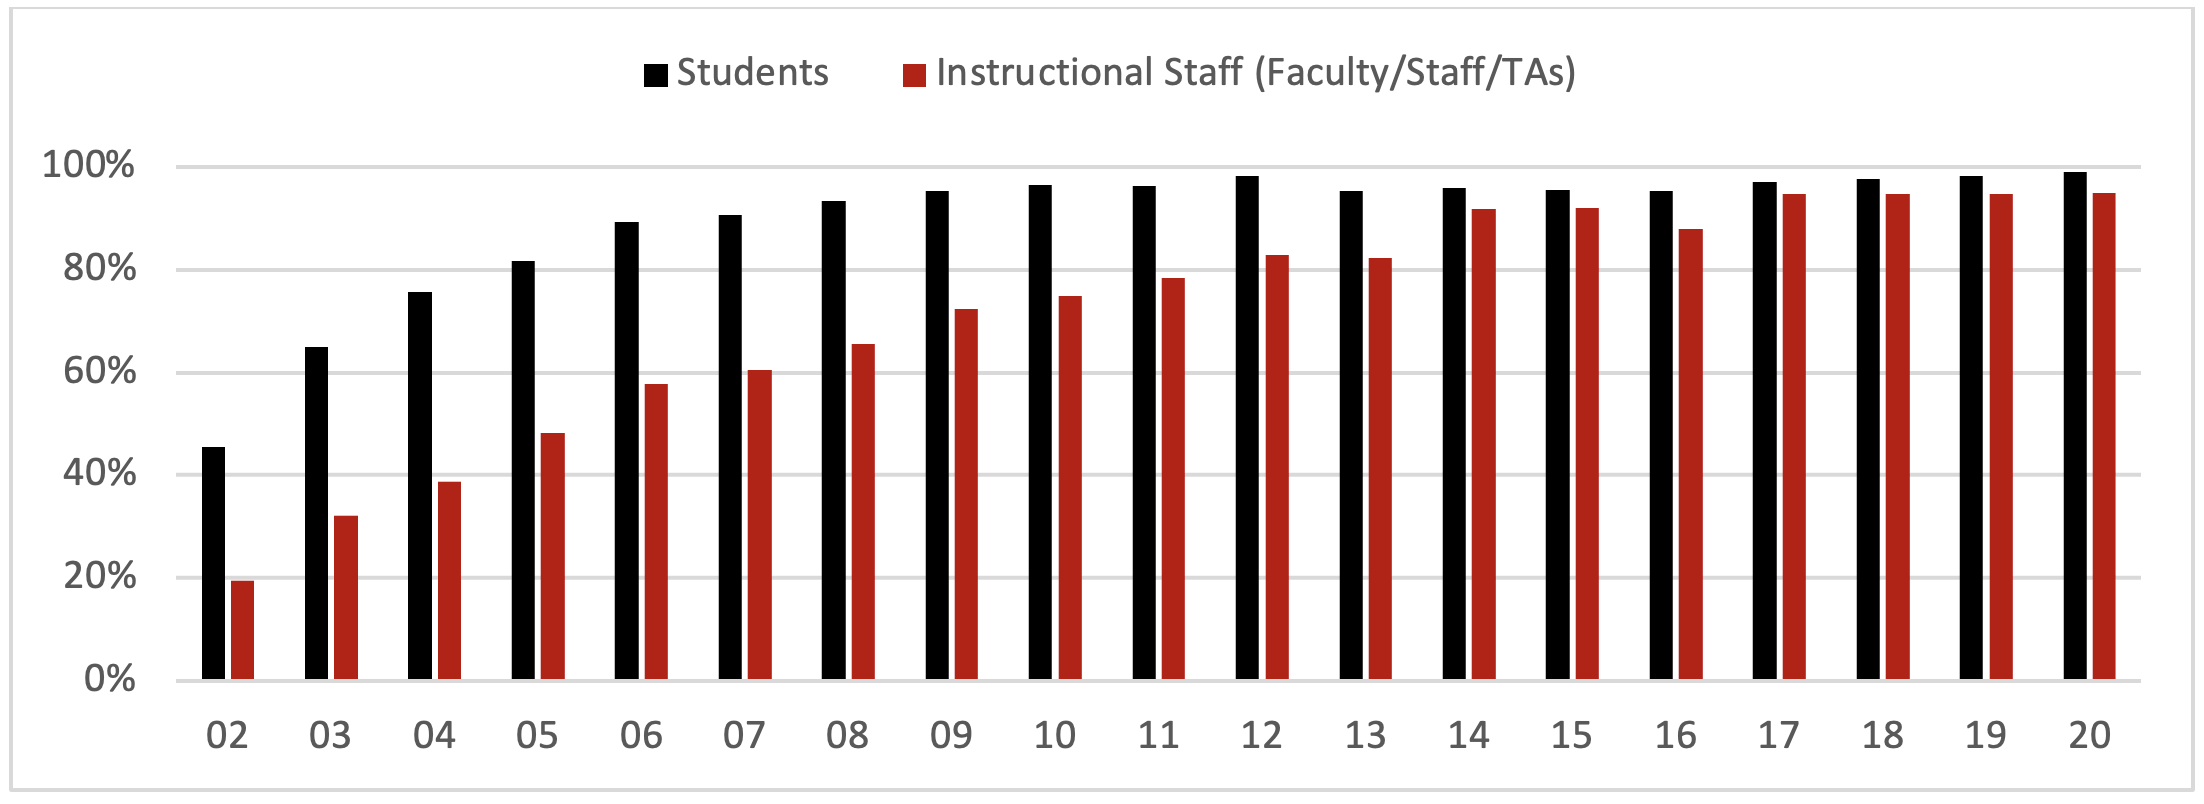 percentage of NIU students and faculty with at least 1 course in Blackboard, 2002-2020